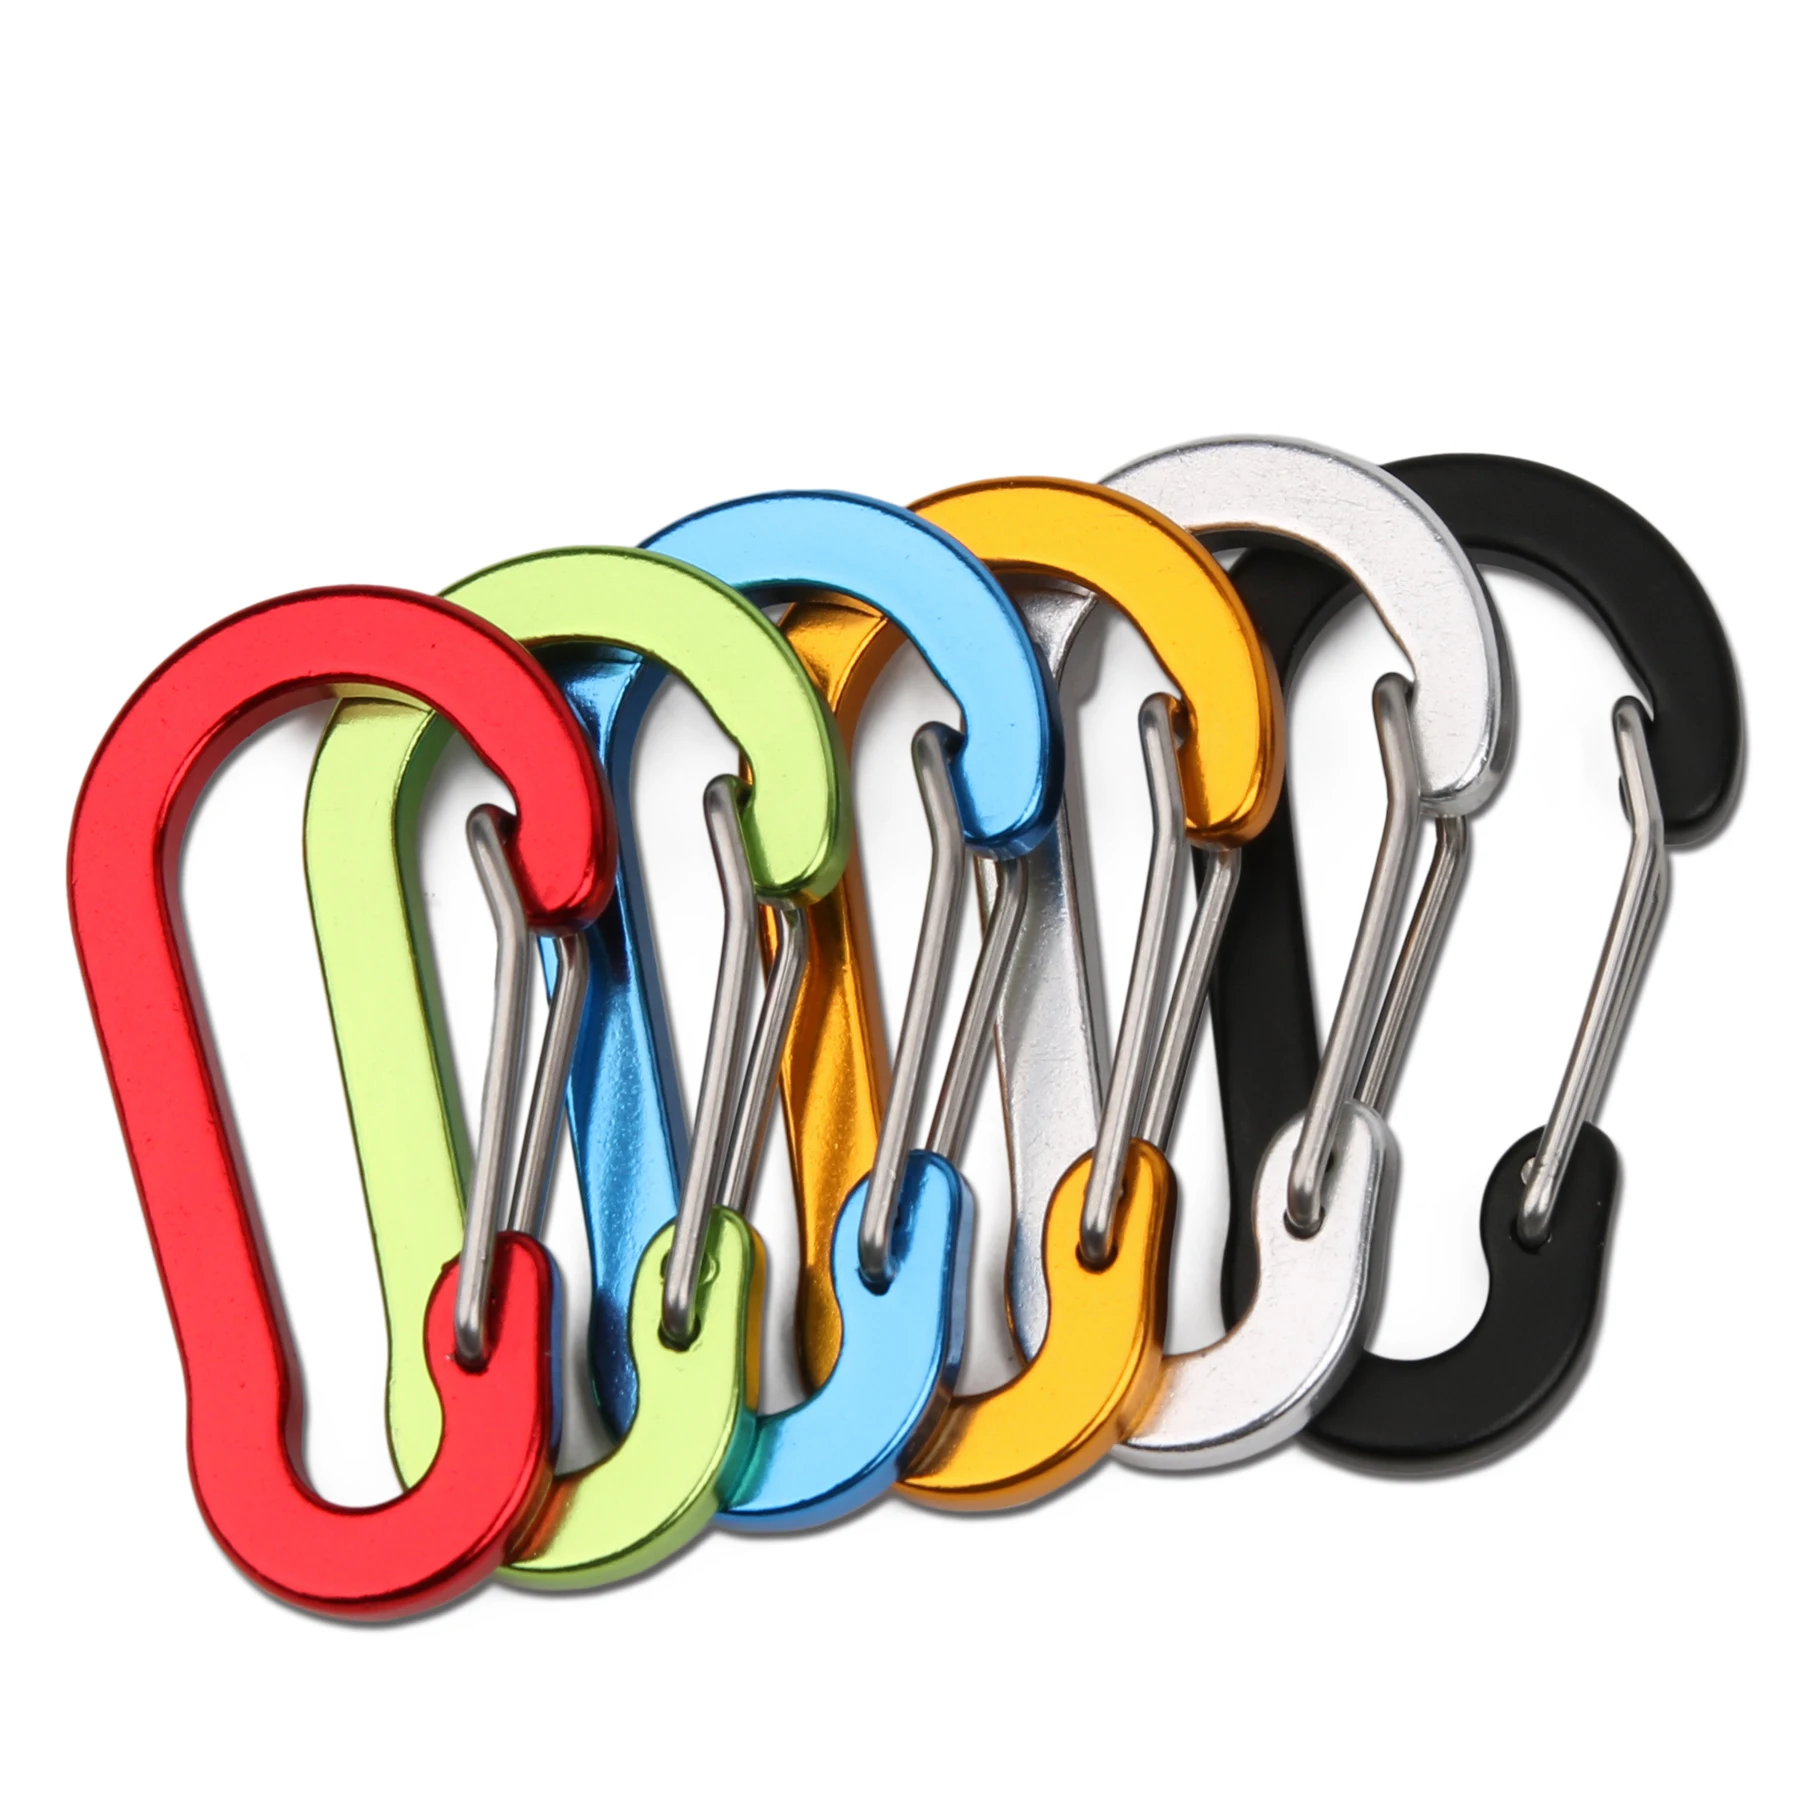 Small Size 5cm Carabiner Clip Hook Key\bchain for Outdoor Camping Hiking Fishing